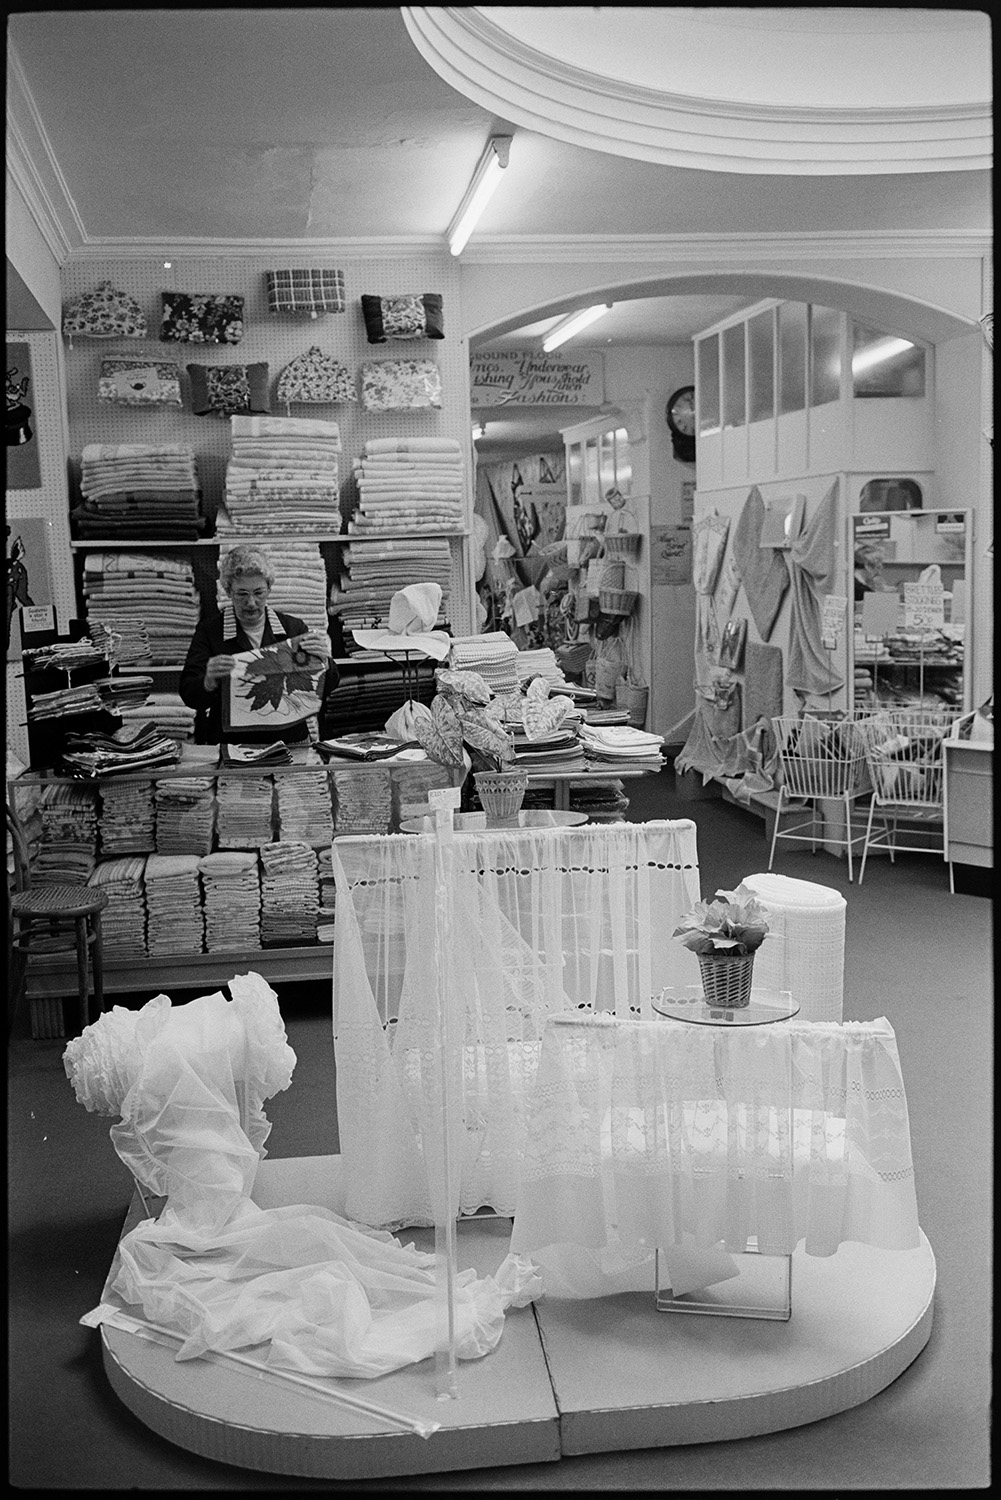 Interior of clothes shop. Various counters, proprietor chatting, window and hat display. 
[A woman folding a tea towel behind a counter in Trapnells clothes shop in Bideford High Street. Stacks of towels and bags are on display behind her. In the foreground is a display of net curtains.]